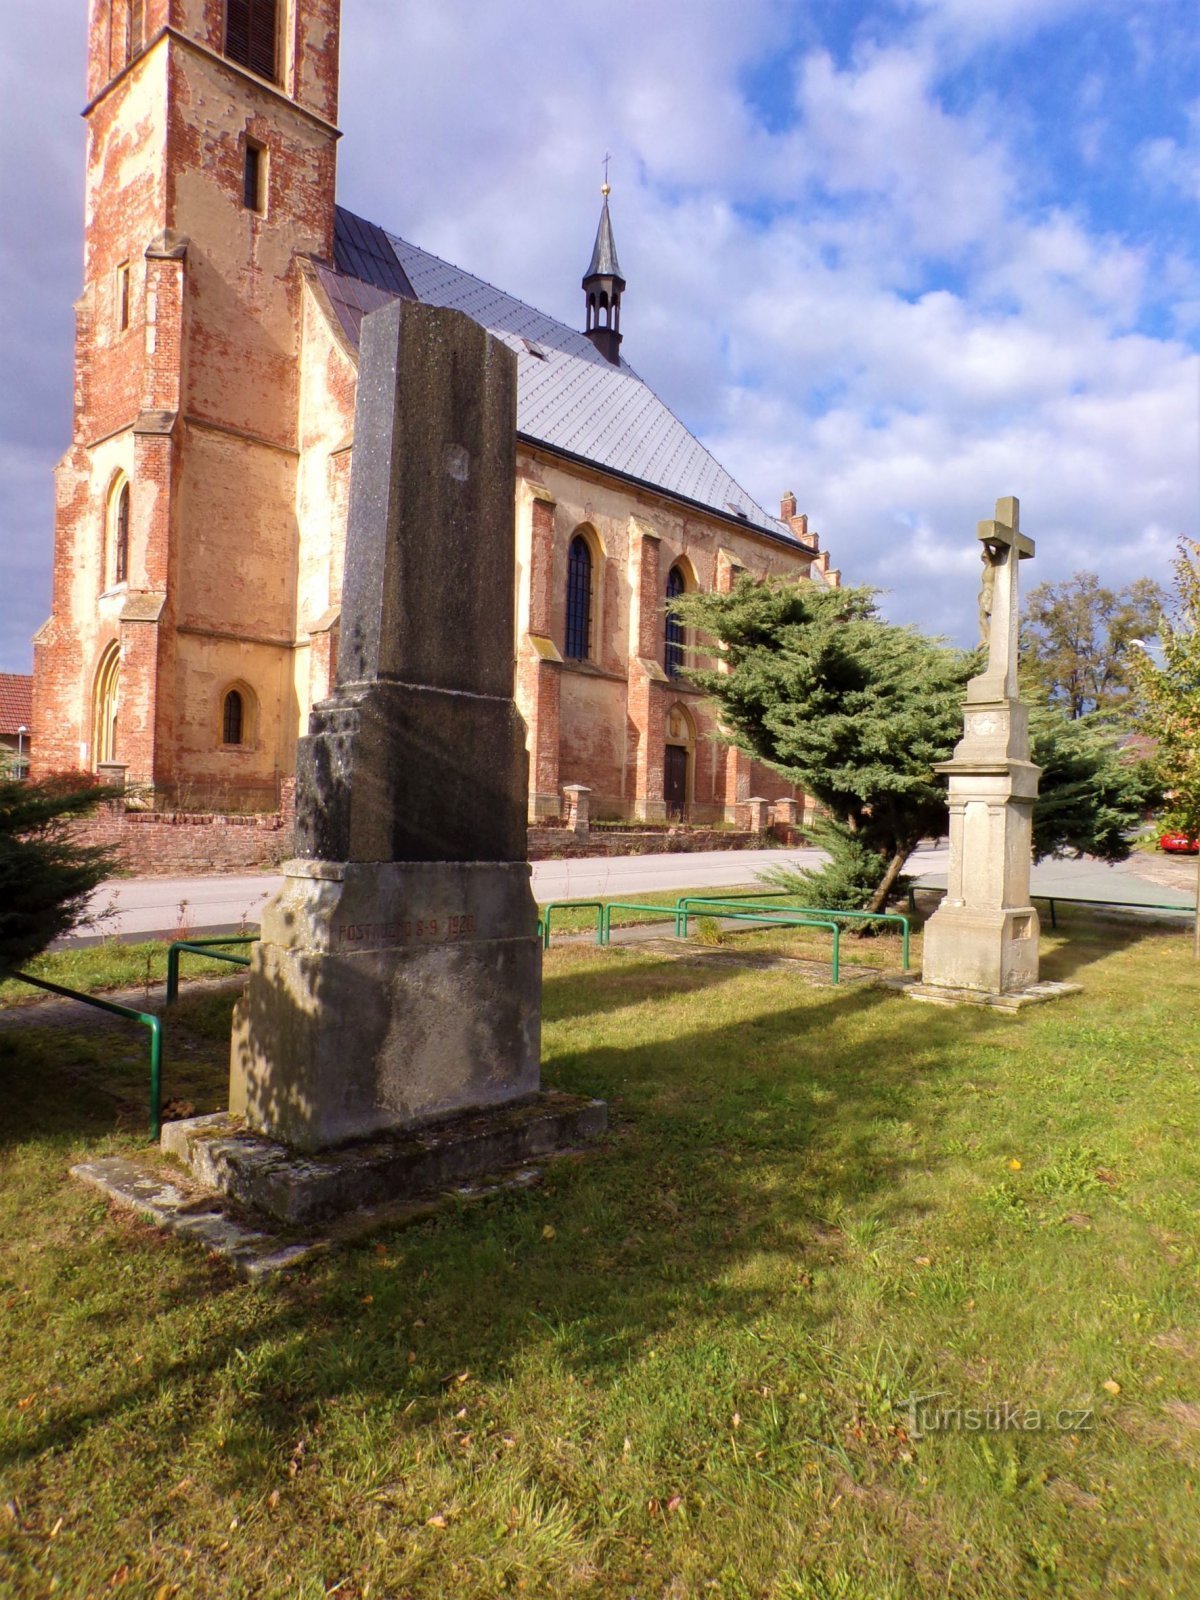 Monument to those who died in the First World War and a cross (Suchá, 1/16.10.2021/XNUMX)